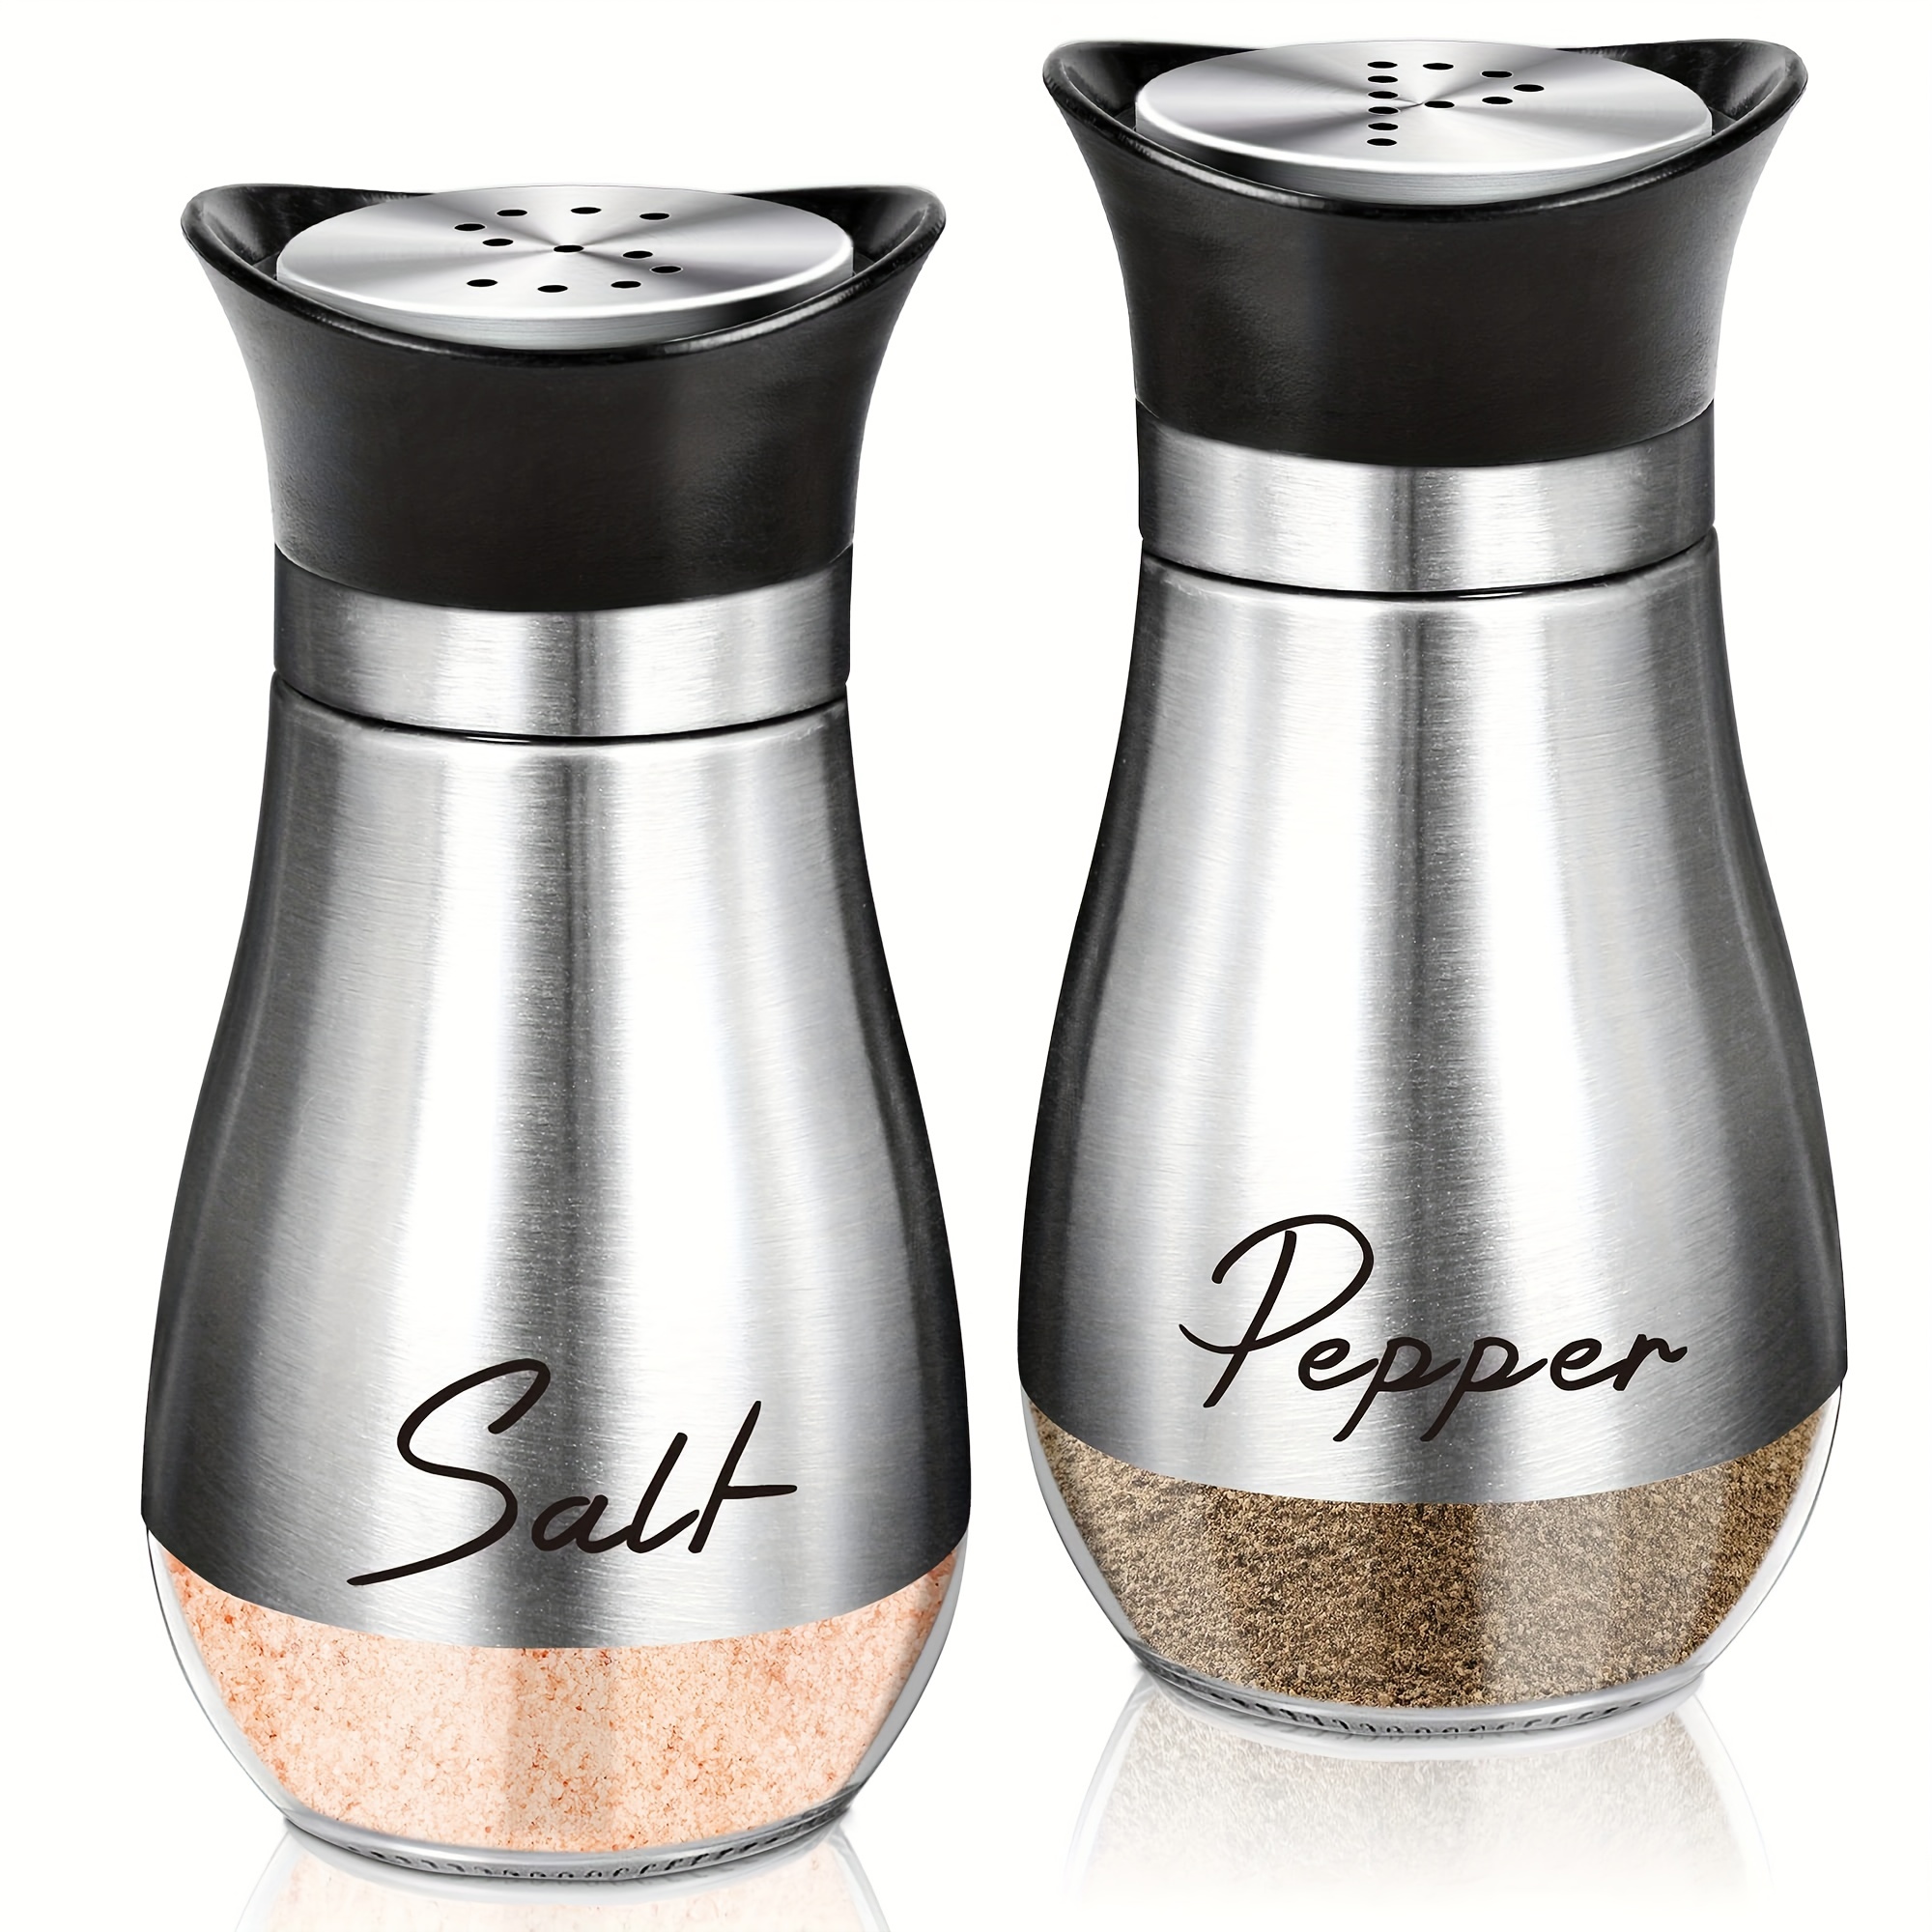 Salt and Pepper Shakers Set,4 oz Glass Bottom Salt Pepper Shaker with Stainless Steel Lid for Kitchen Cooking Table, RV, Camp,BBQ Refillable Design